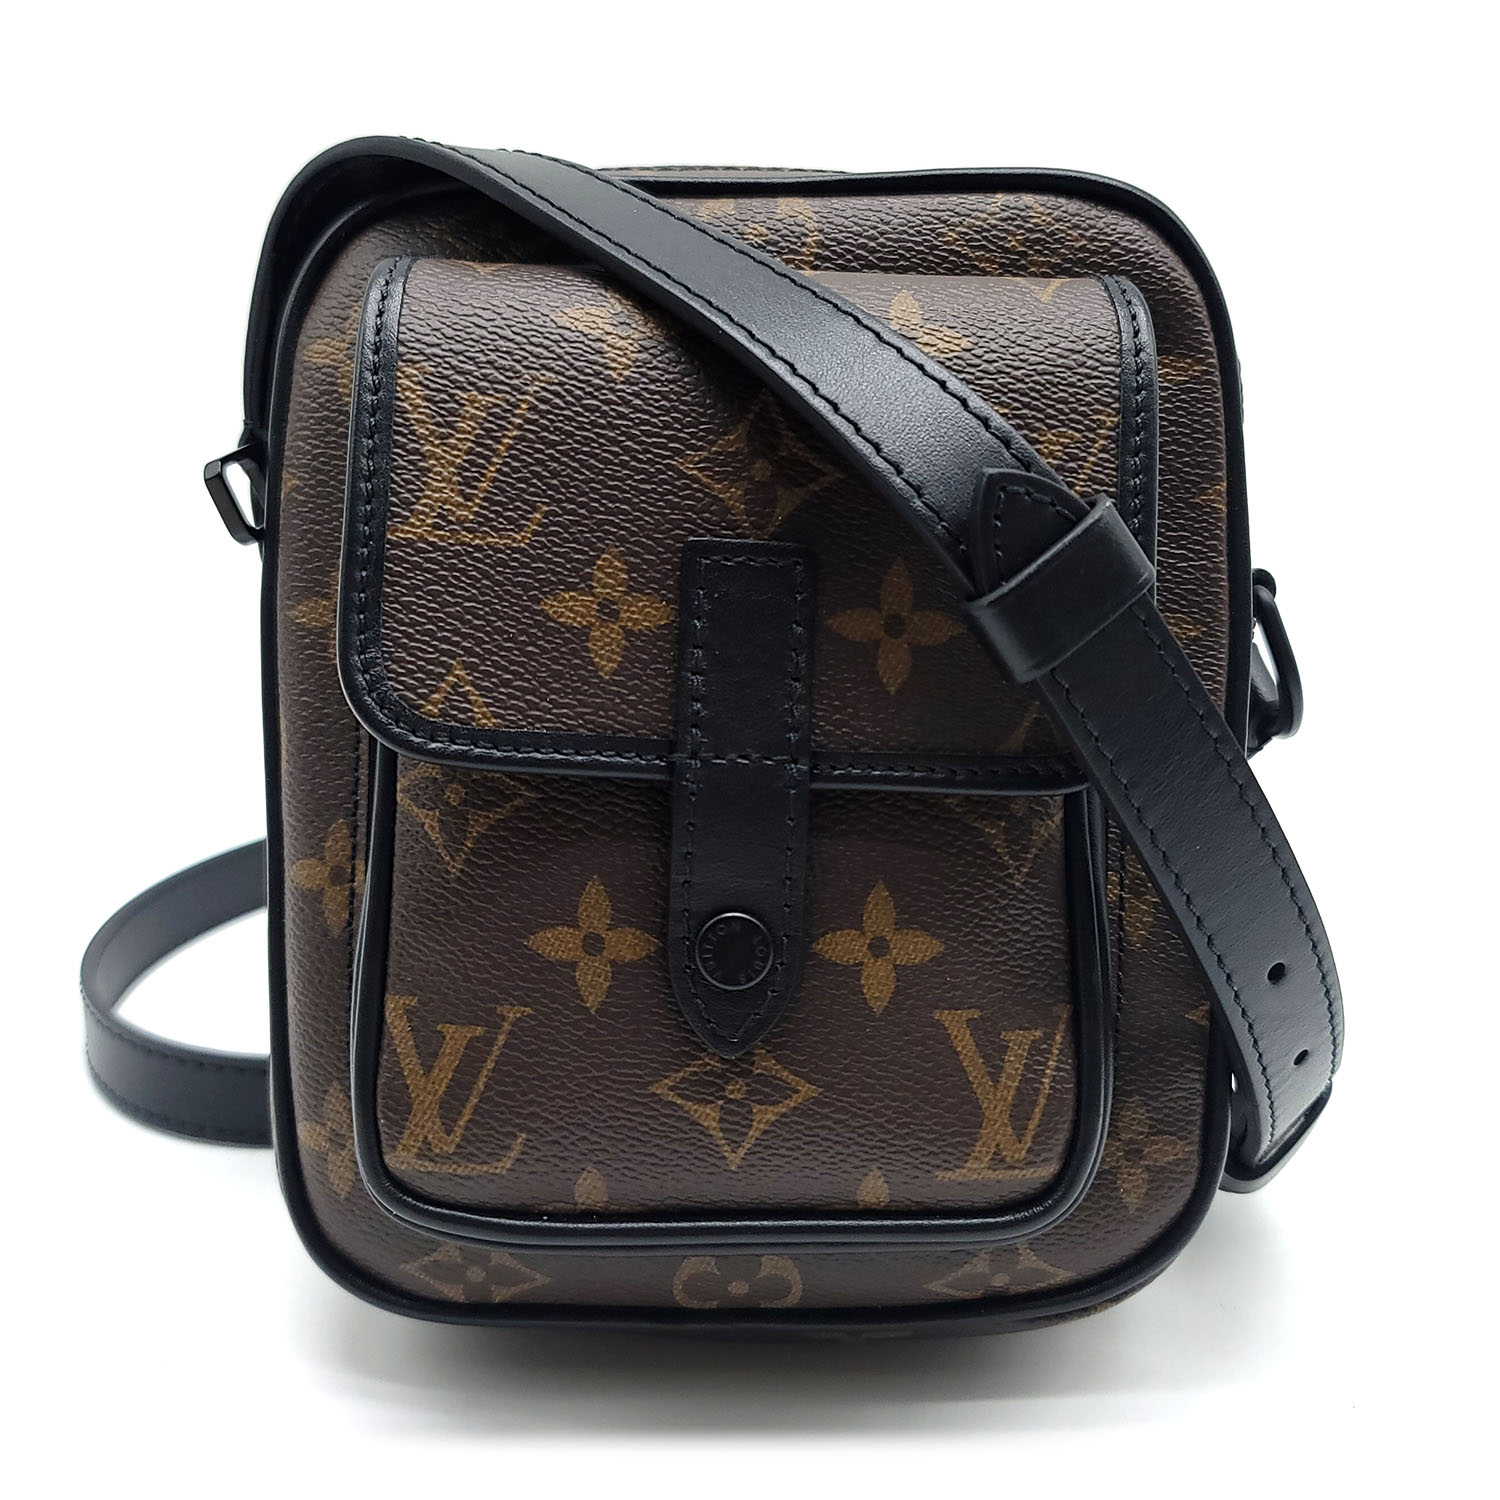 LV Christopher Wearable Wallet